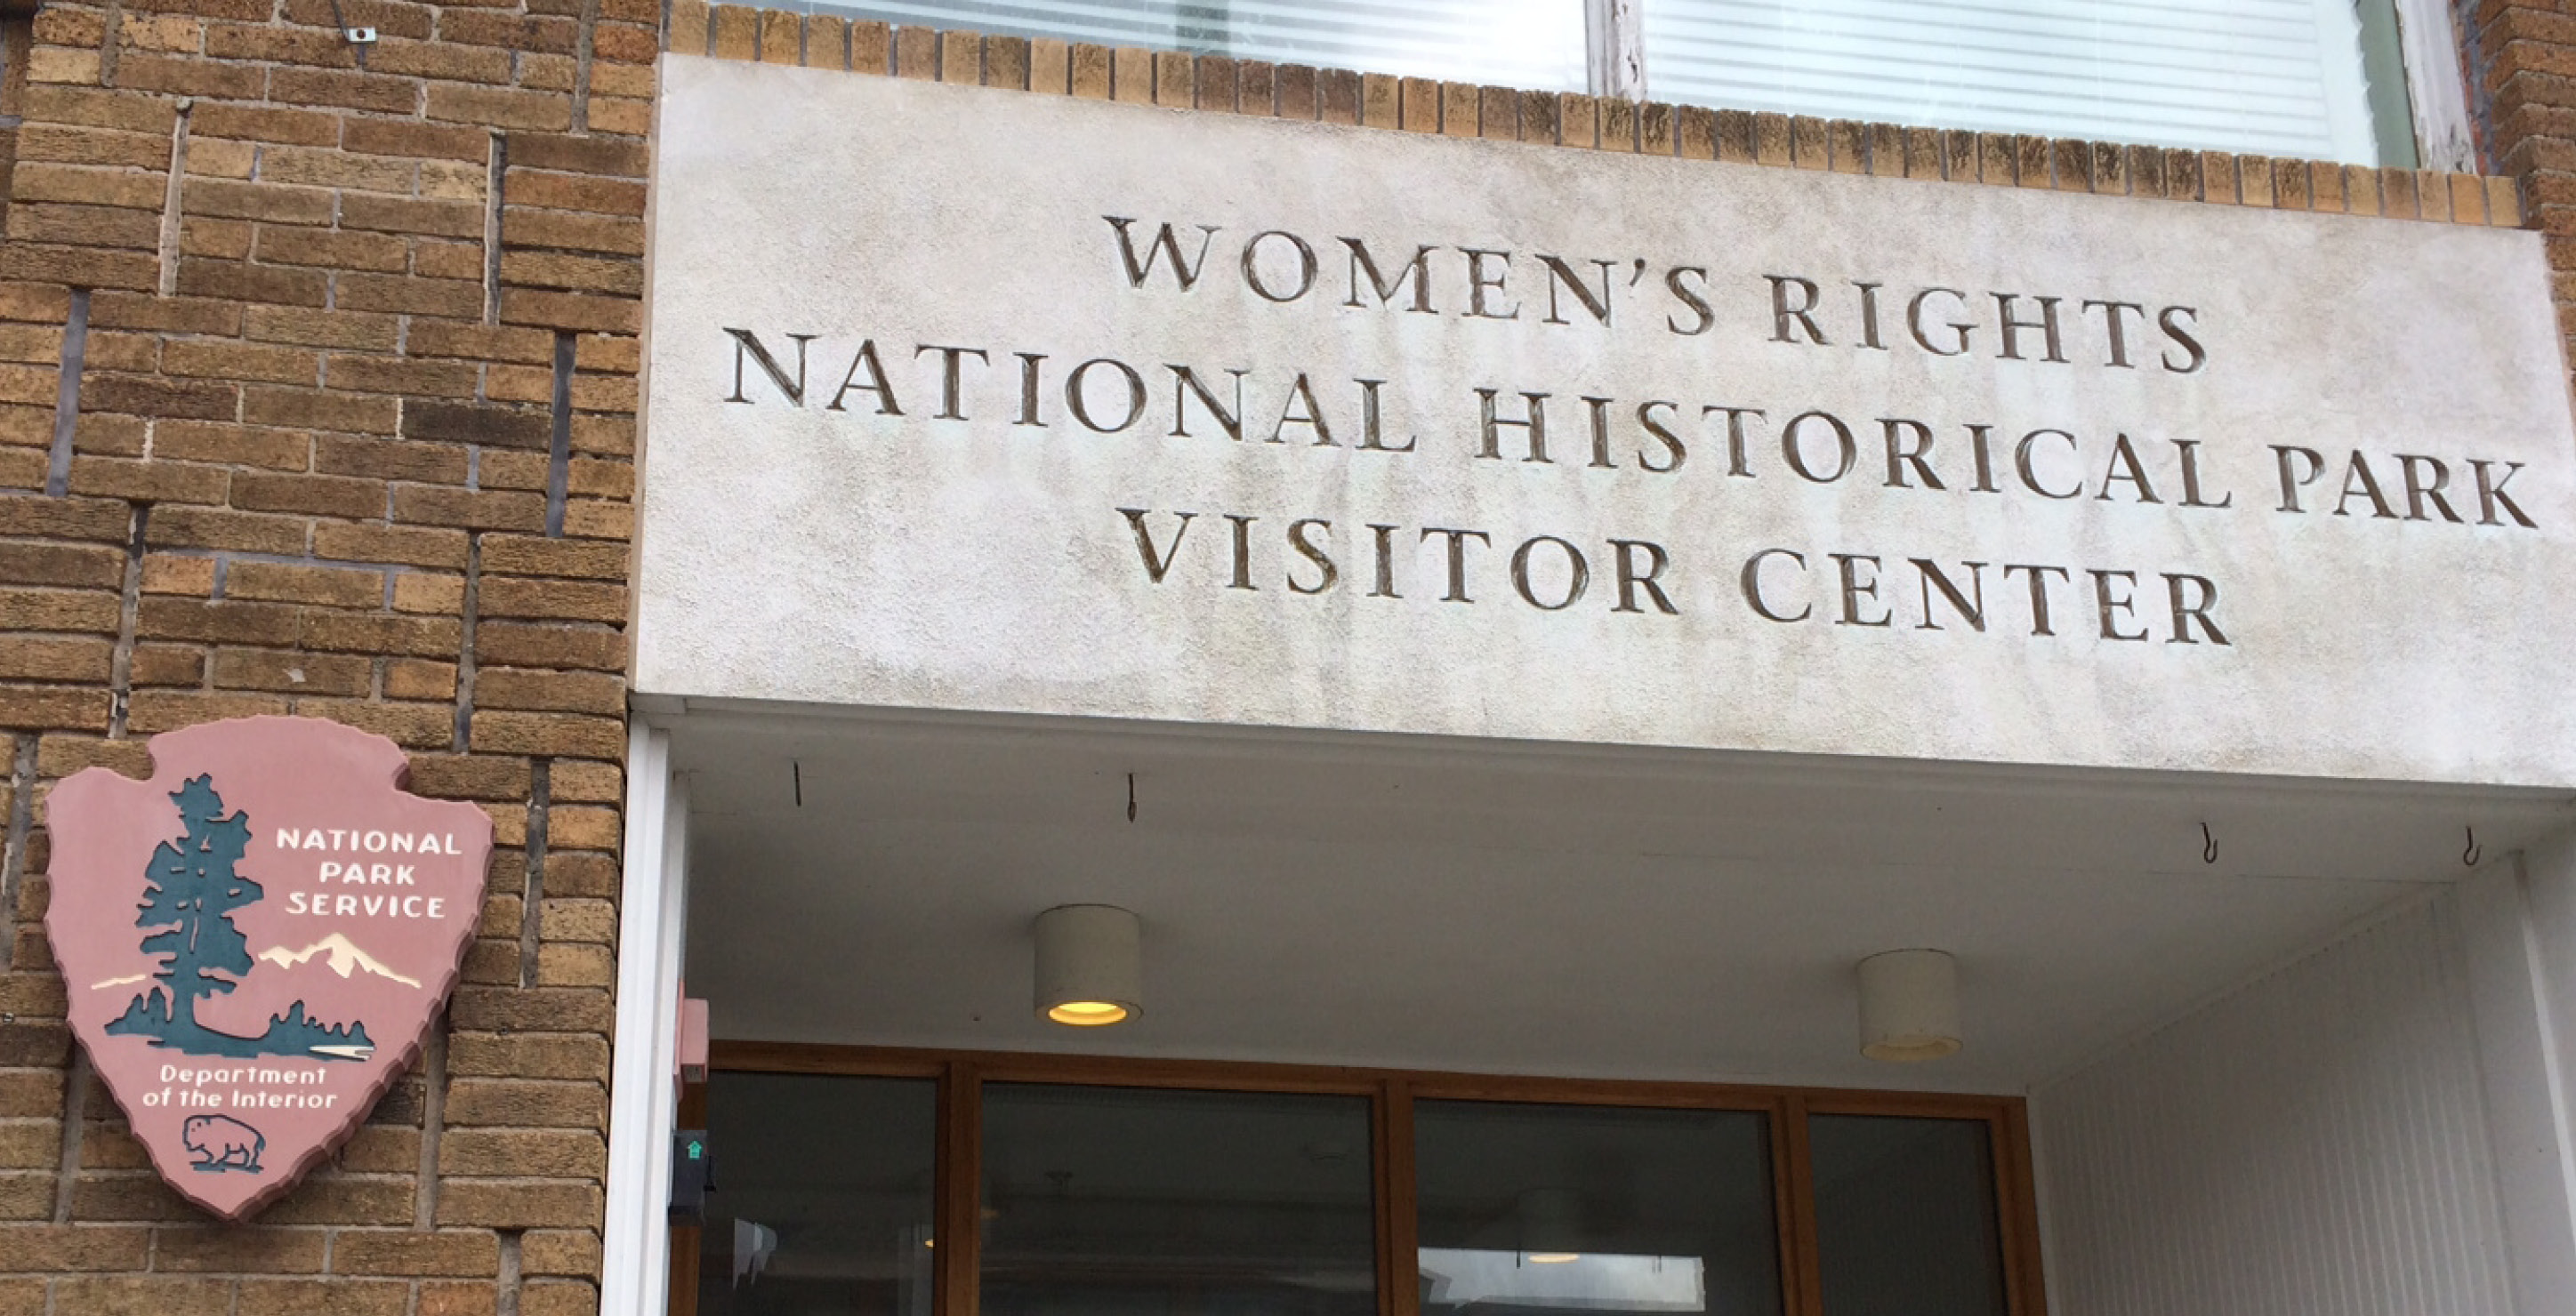 Entrance to Women's Rights National Historical Park Visitor Center